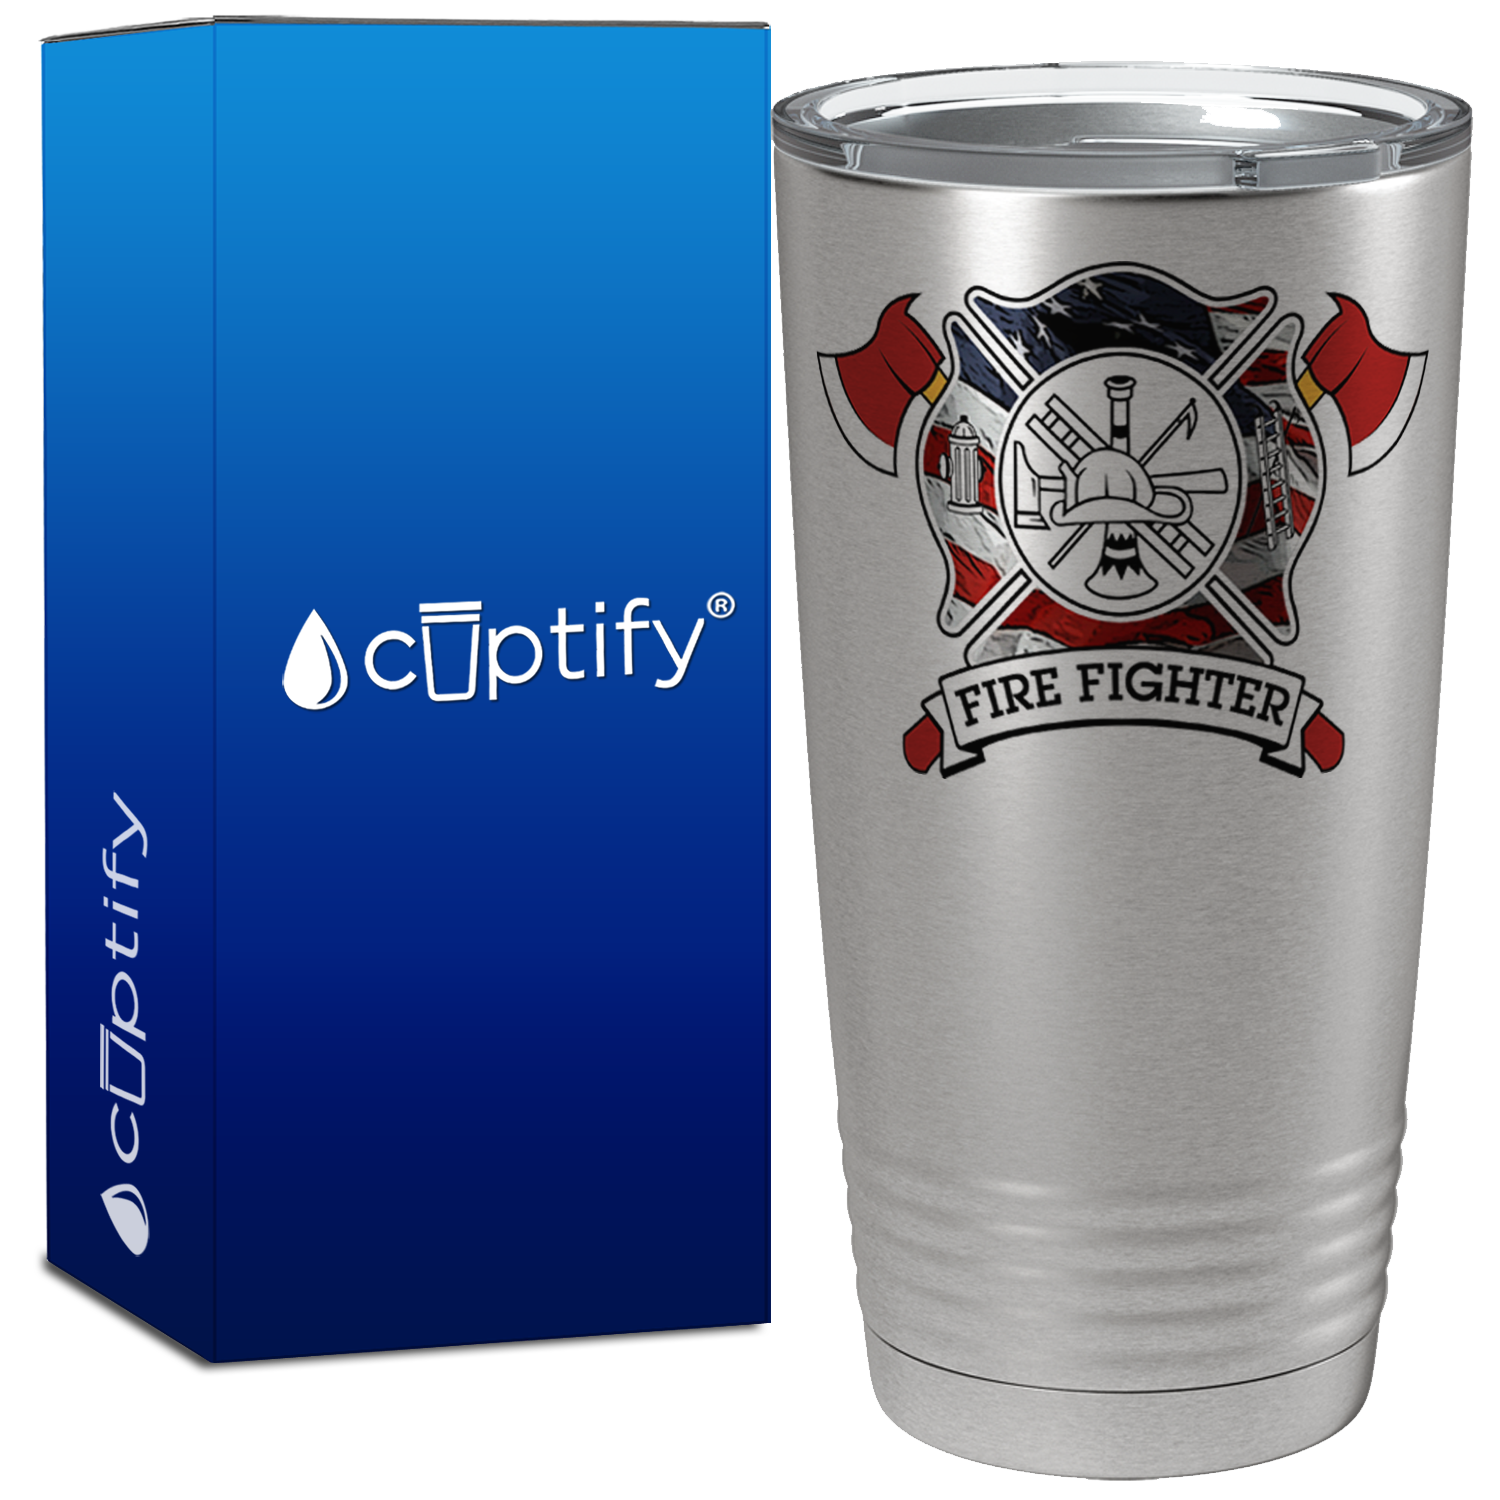 American Fire Department Badge on Stainless Firefighter Tumbler